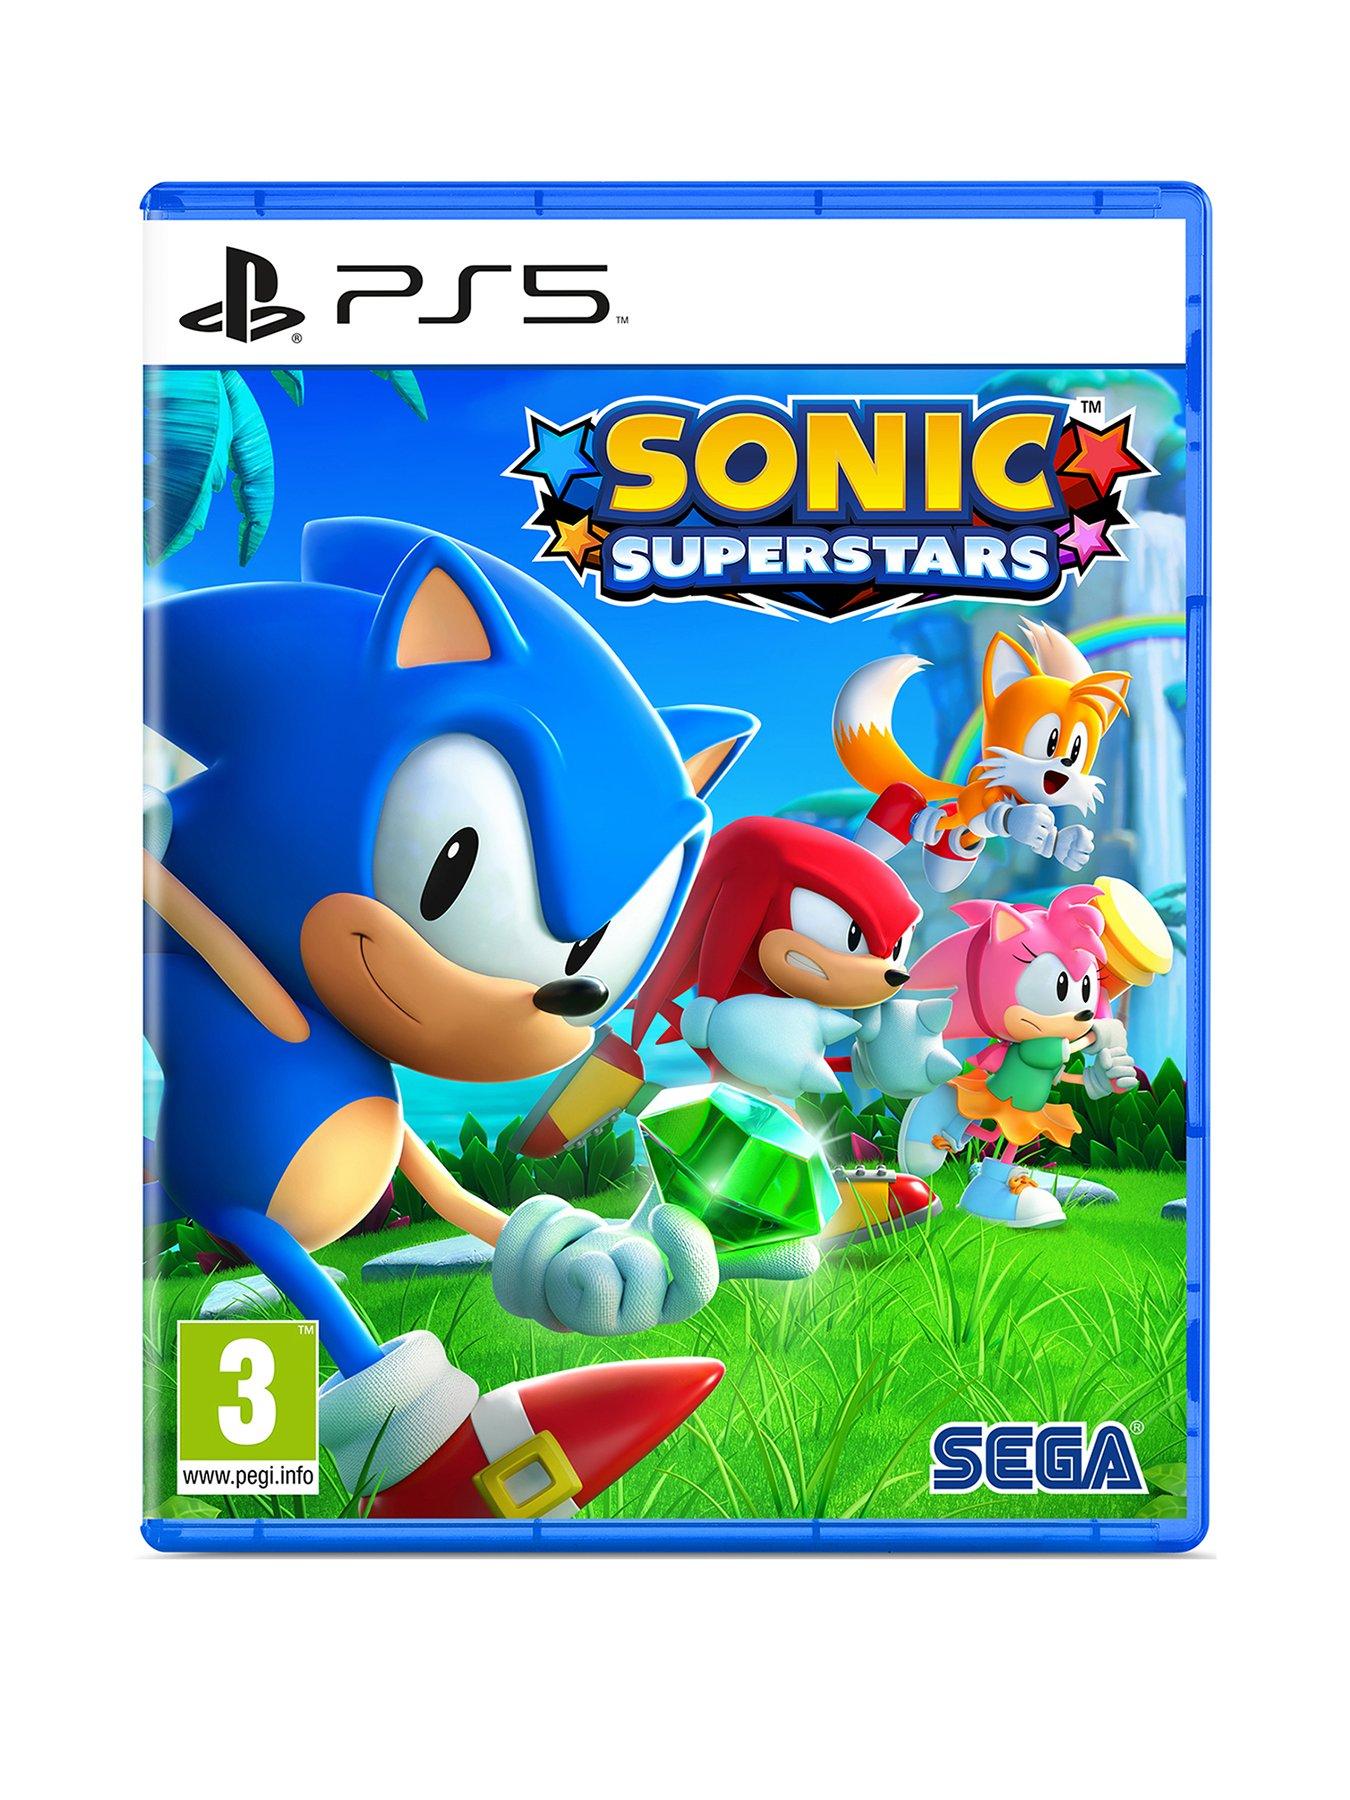 Stickers Consoles Sonic Forces, Sonic Hedgehog Stickers